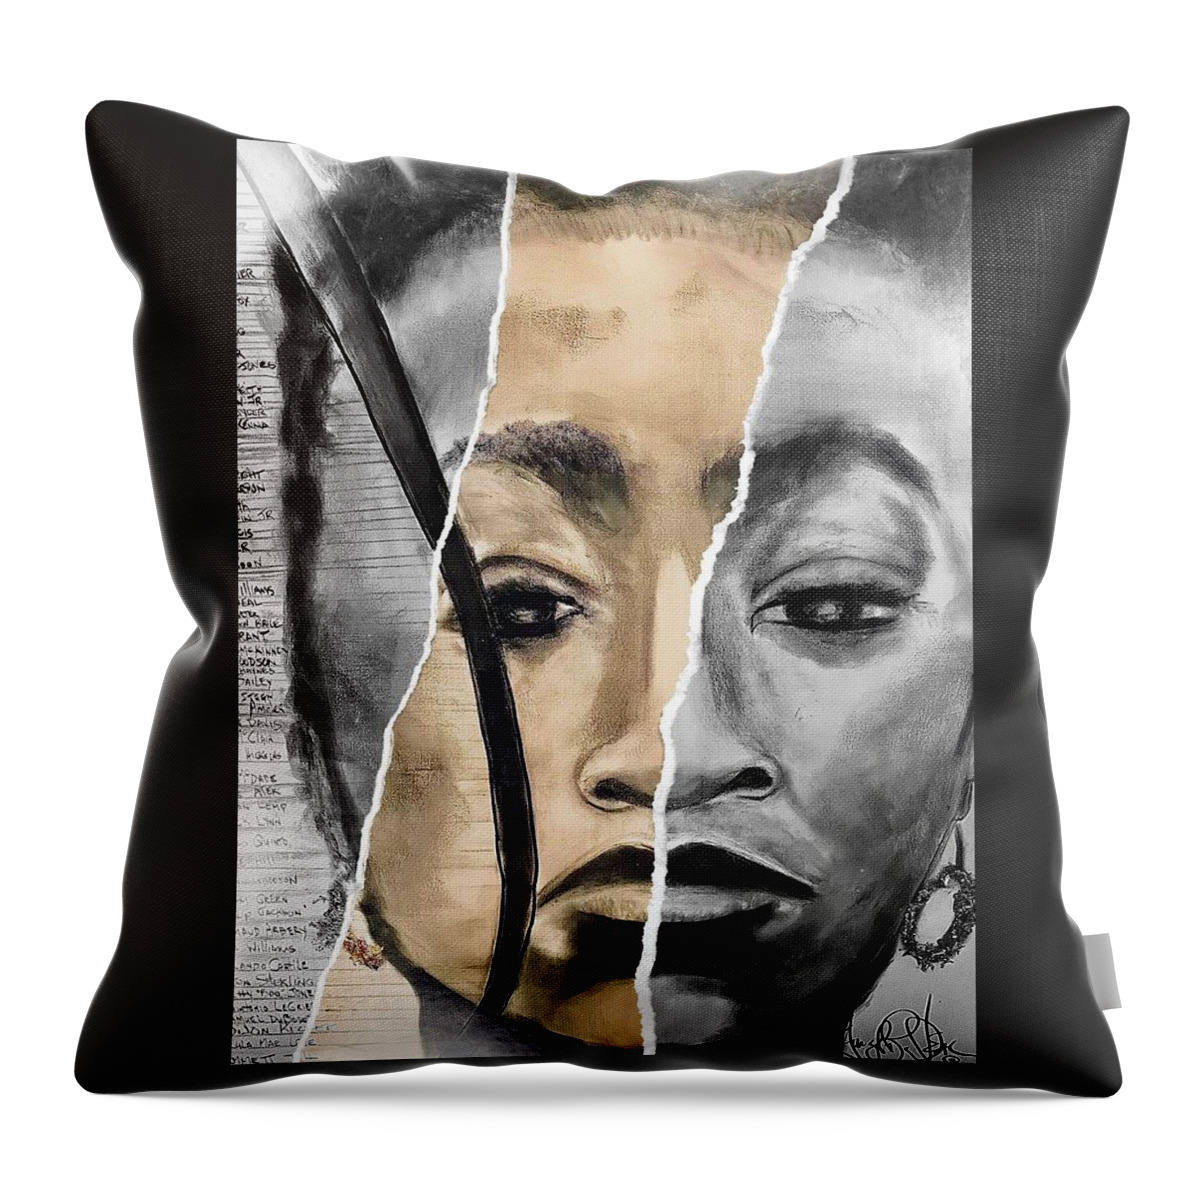  Throw Pillow featuring the mixed media Broken by Angie ONeal